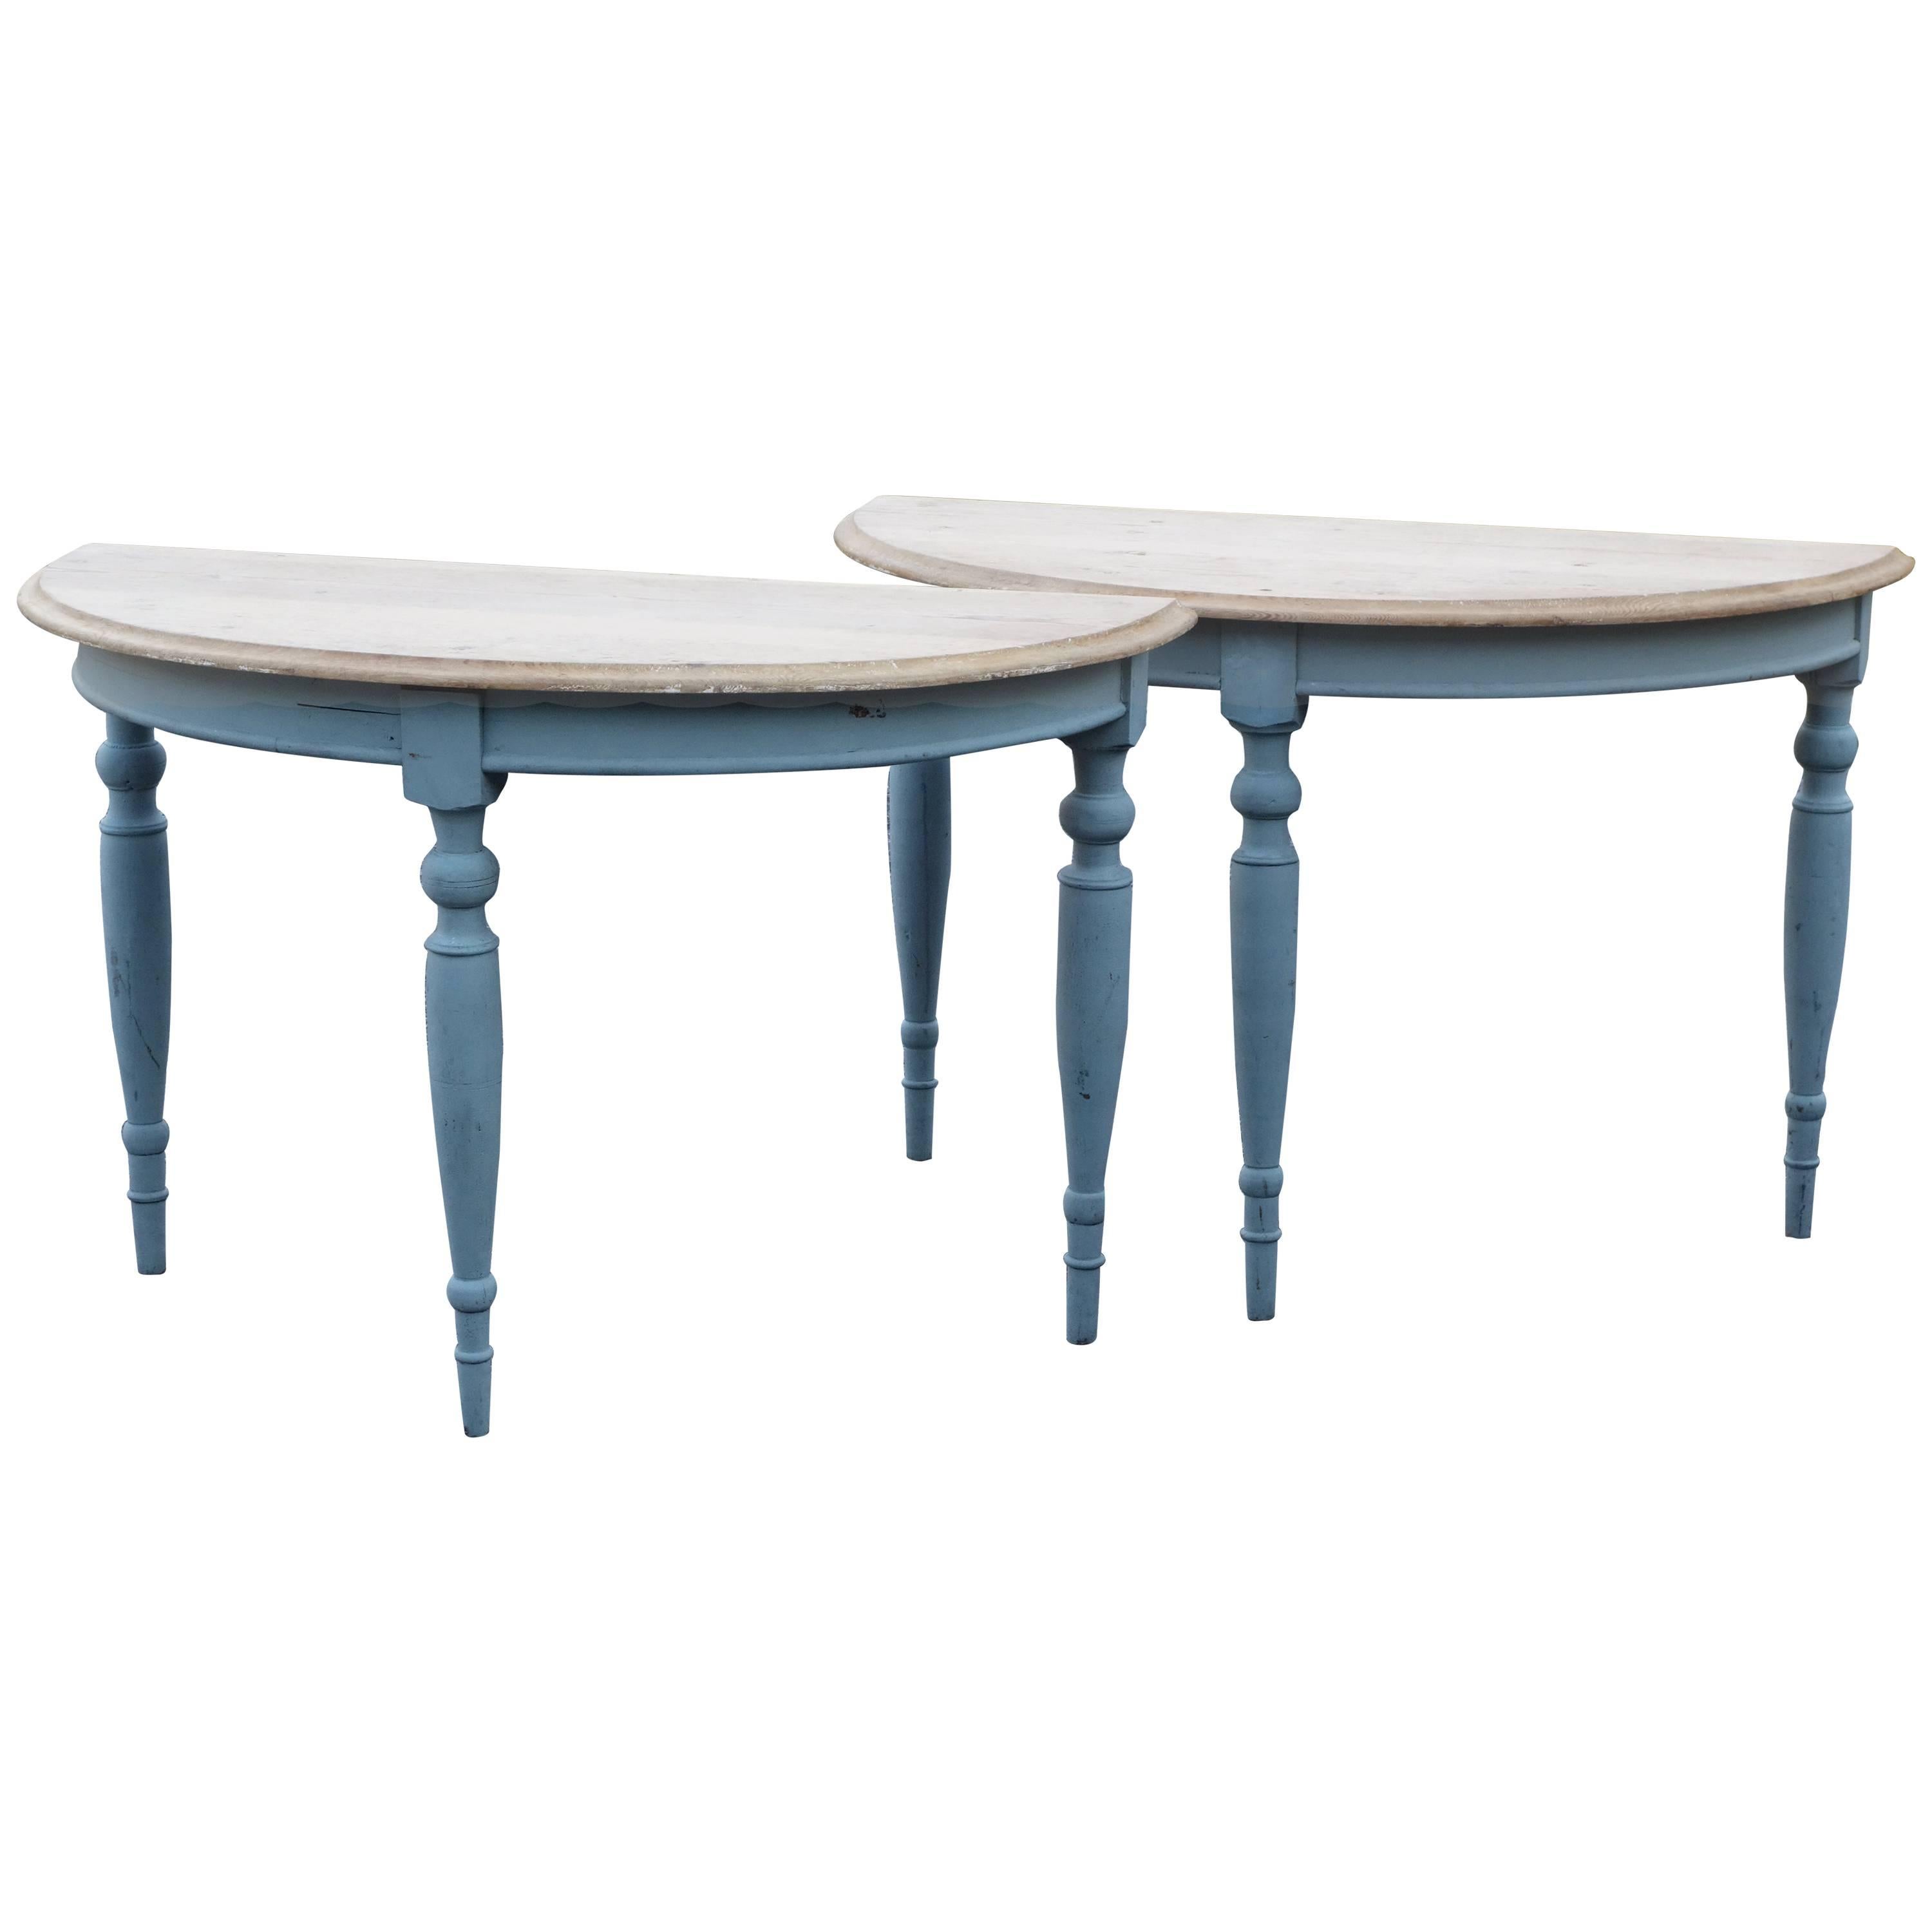 English Demilune Tables For Sale